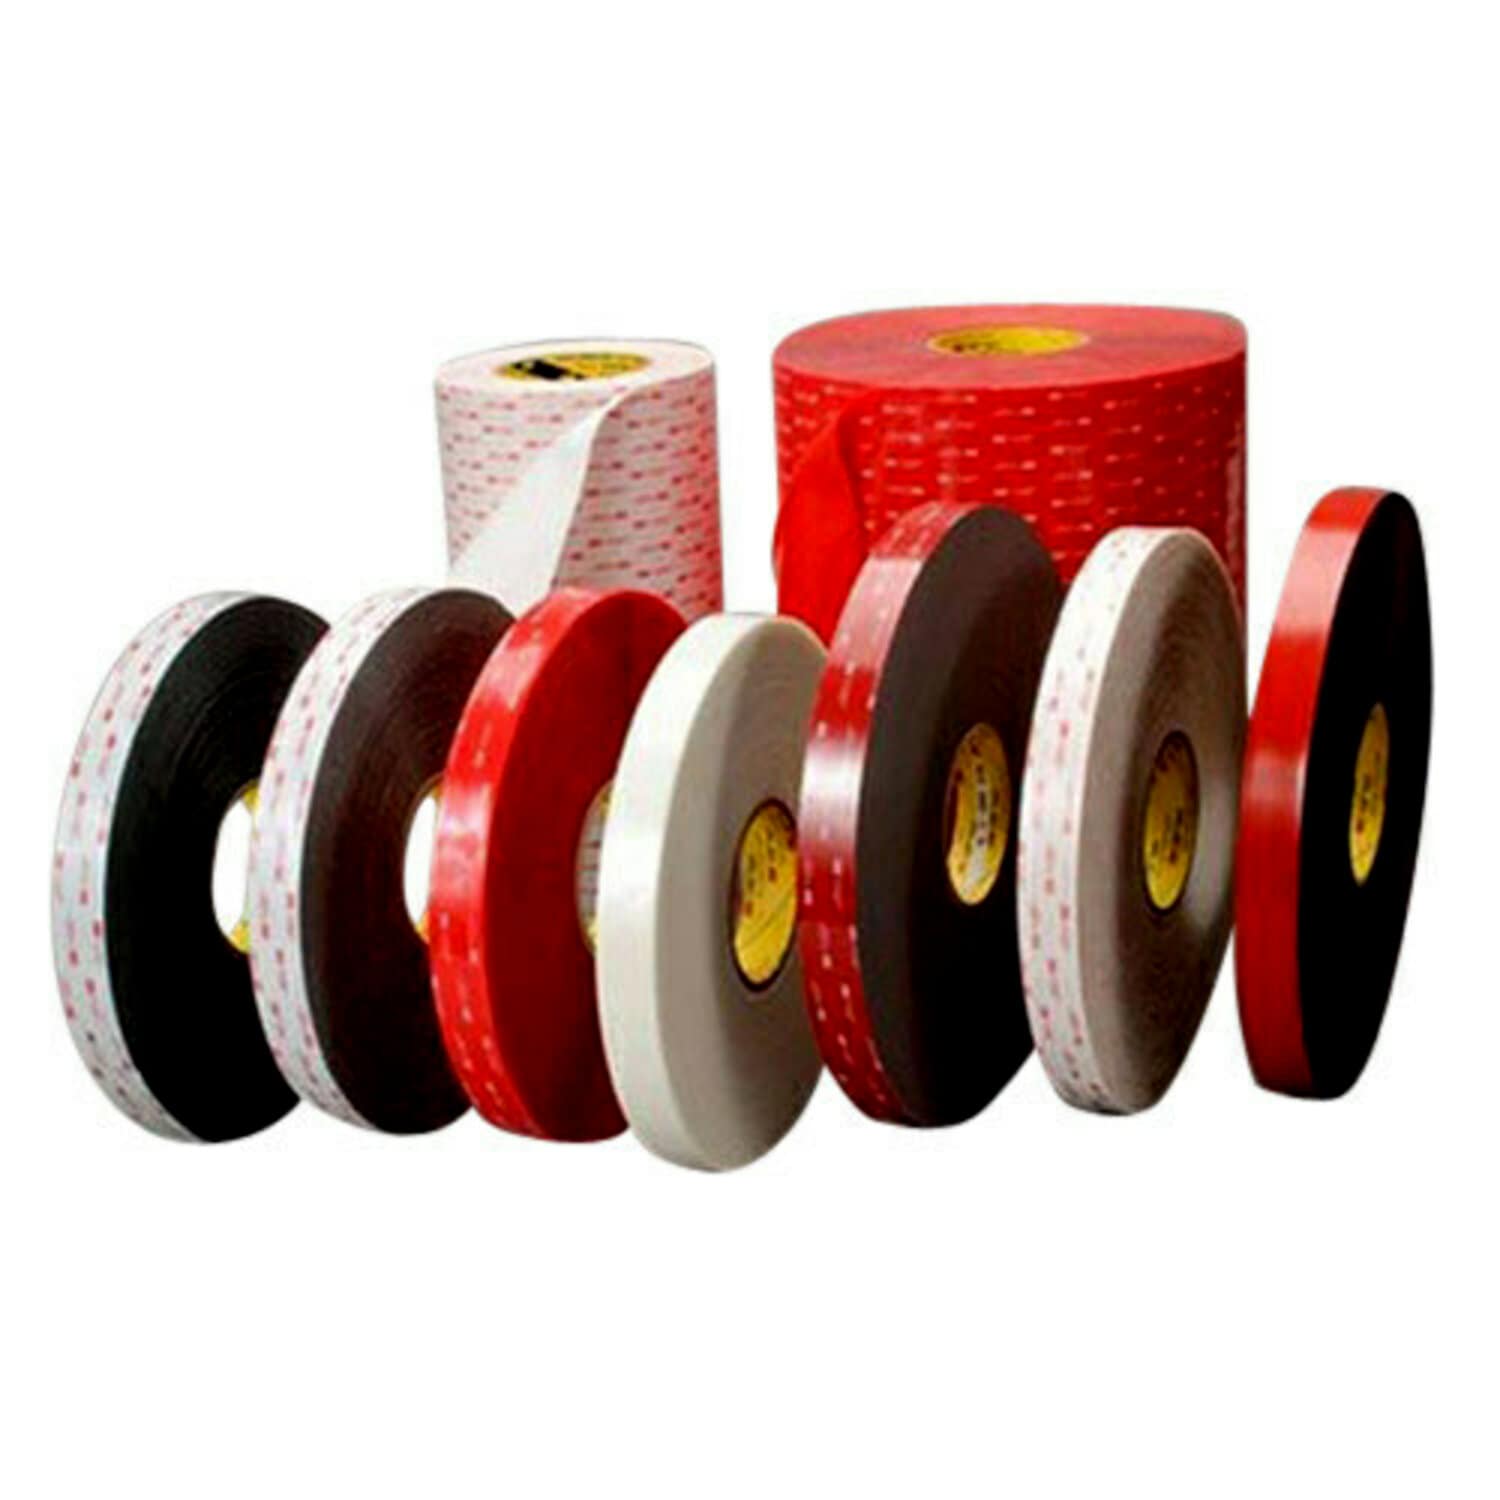 Fabric Adhesive Tape for Packing / Bundling NO. 750 (Shrink), Product  Information